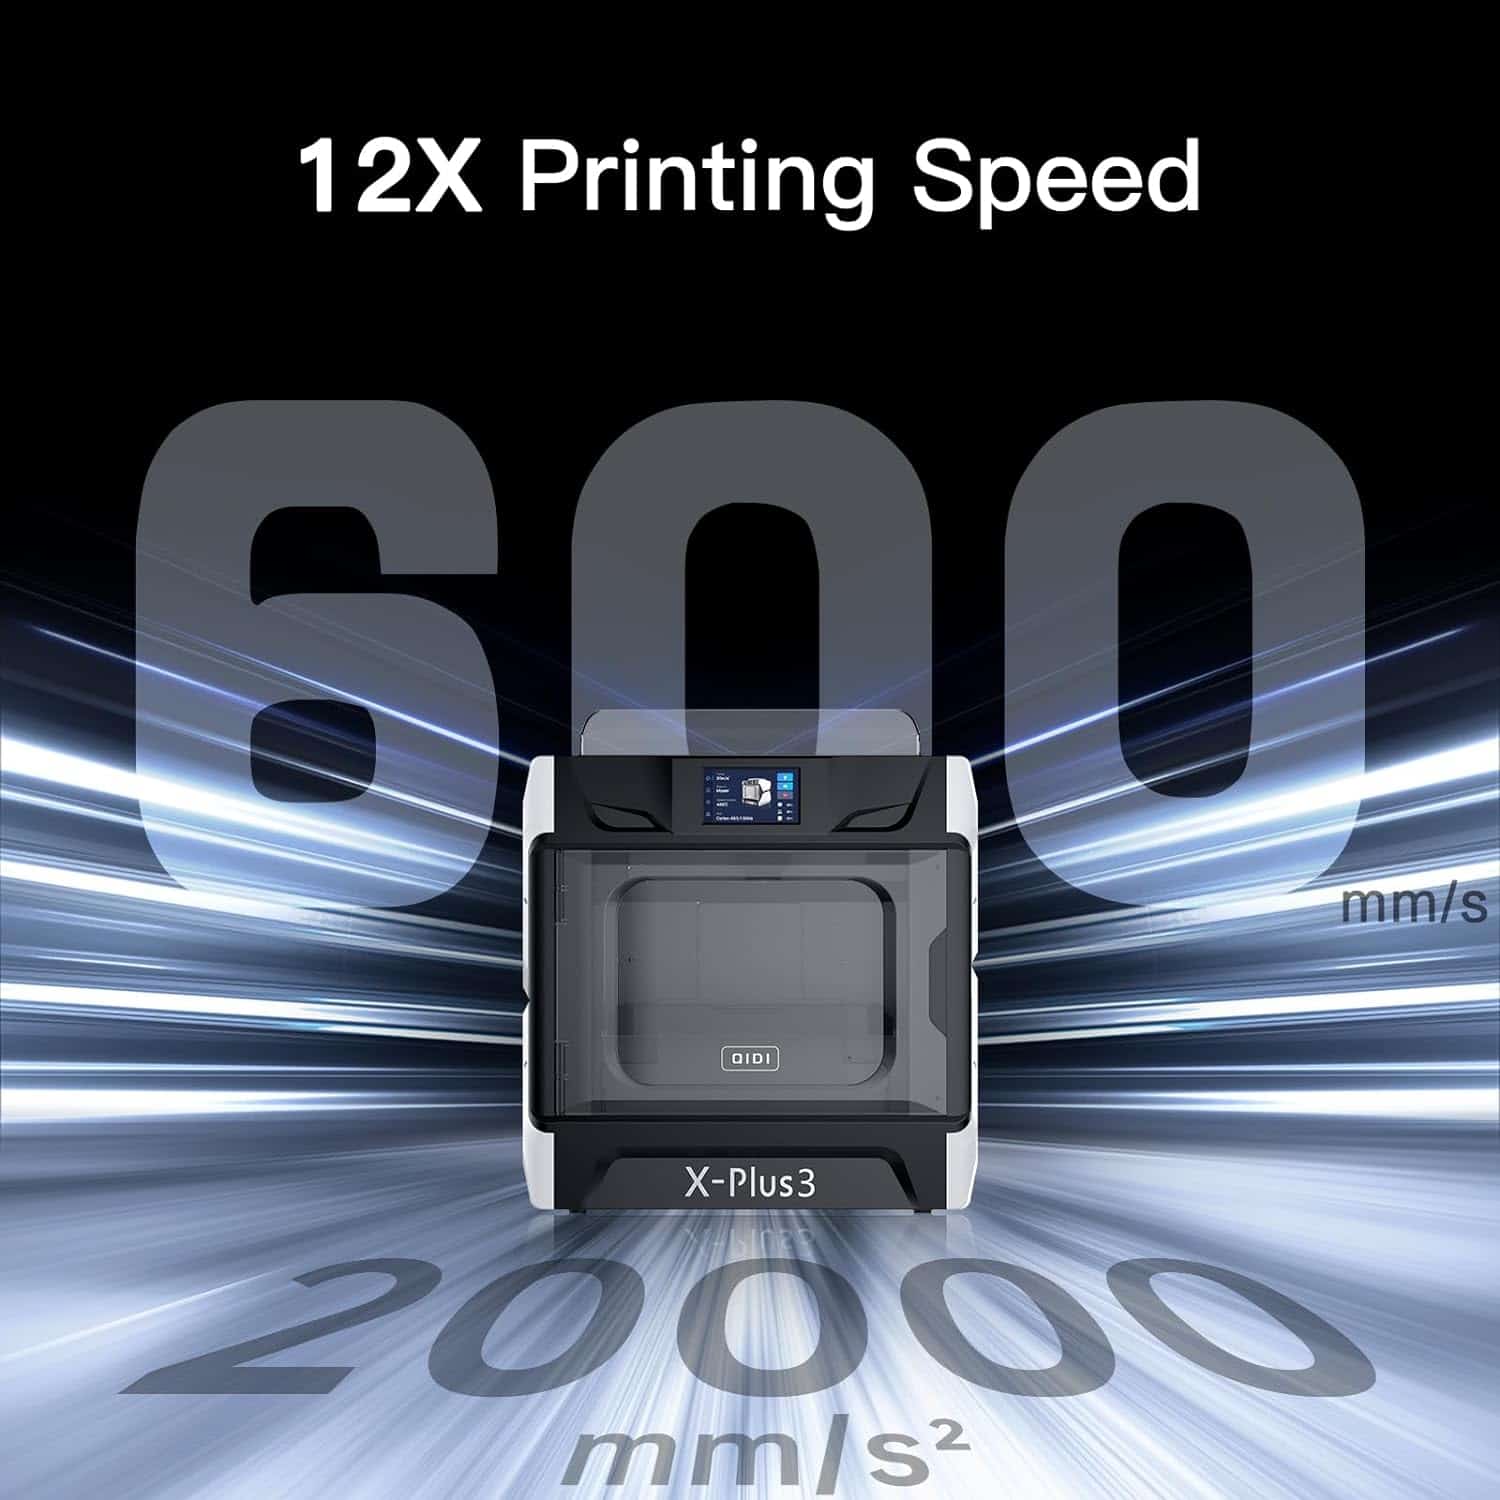 r-qidi-technology-x-plus3-3d-printers-fully-upgrade-600mms-industrial-grade-high-speed-3d-printer-acceleration-20000mms2-3